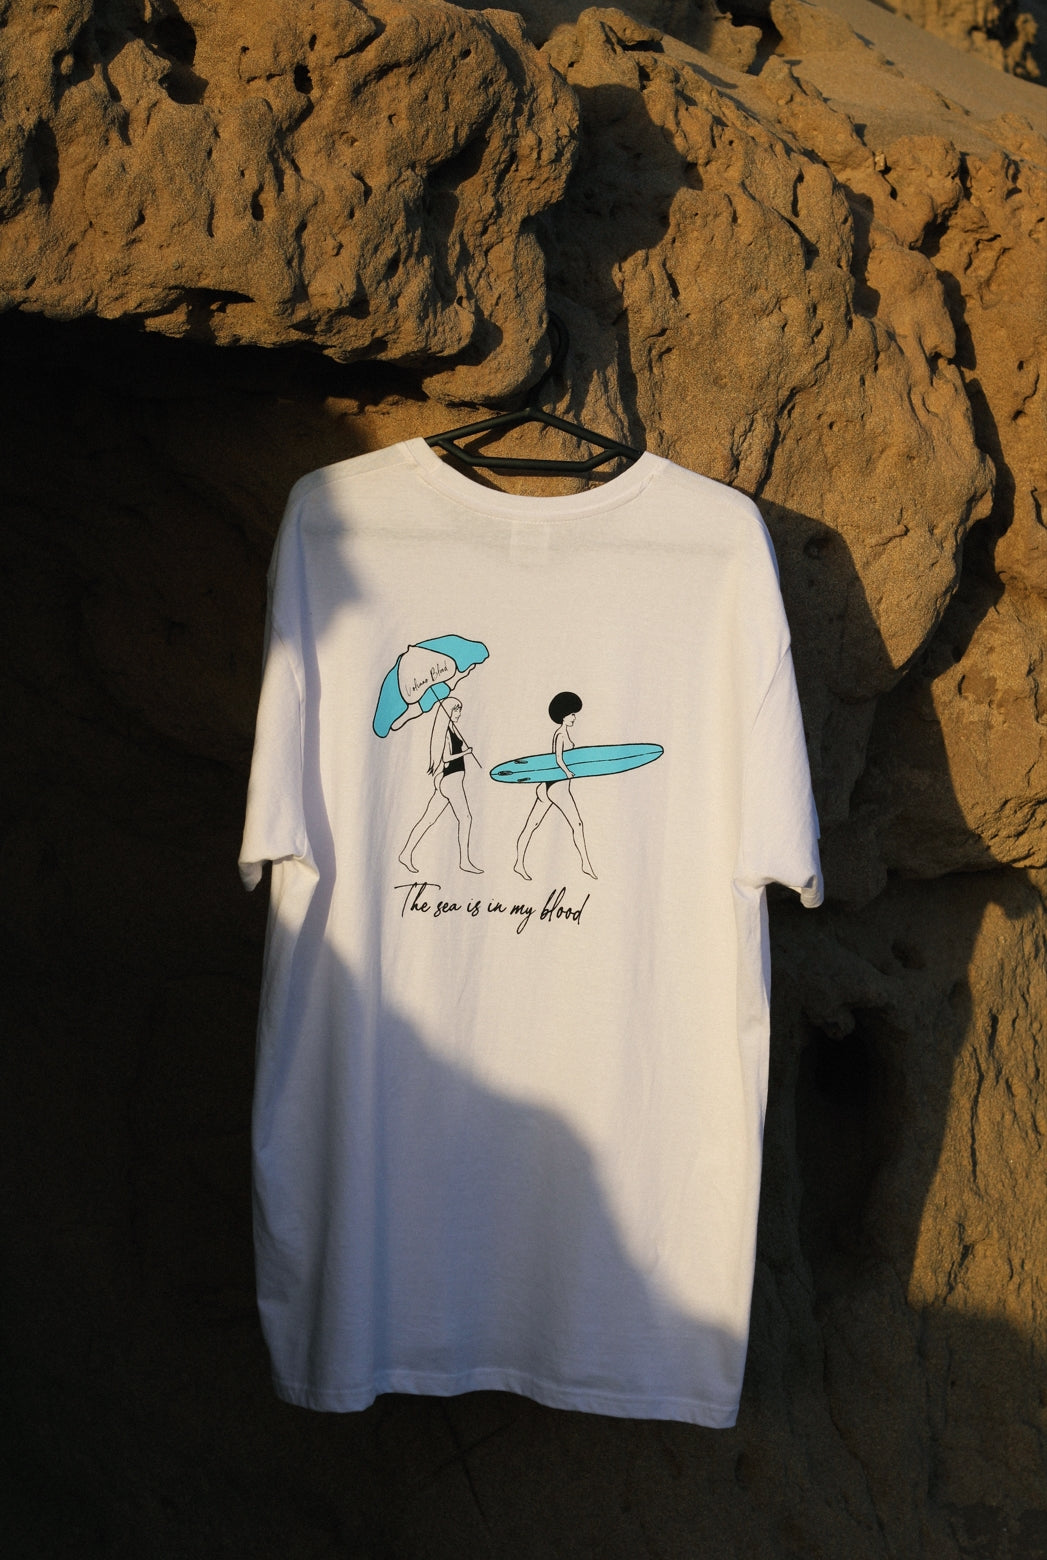 "THE SEA IS IN MY BLOOD" T-SHIRT